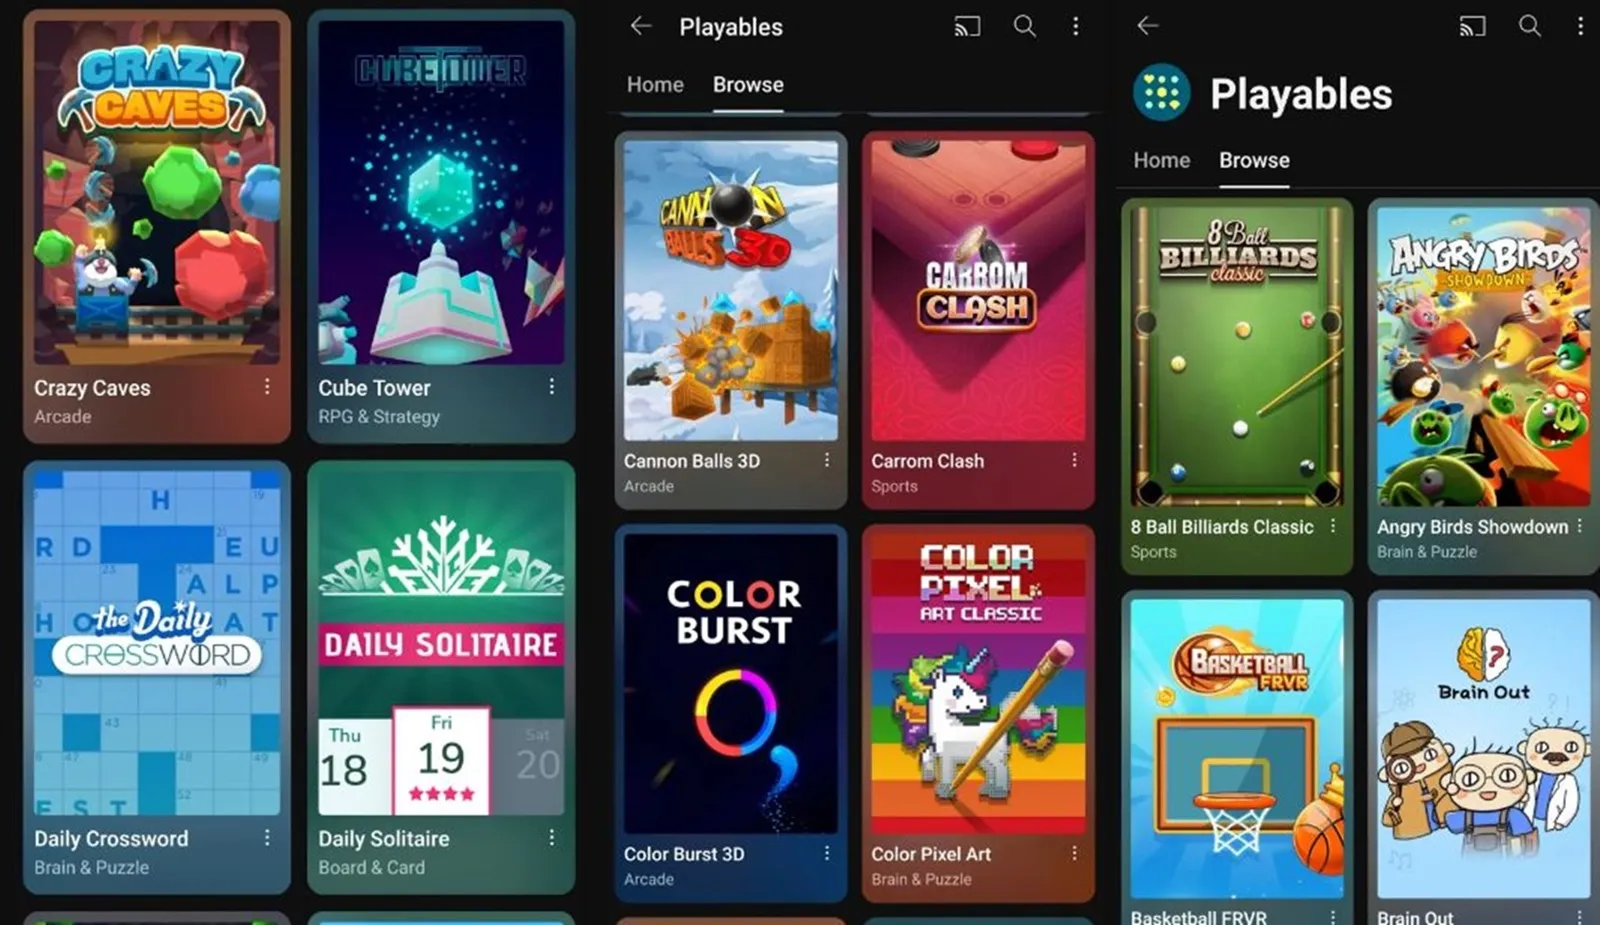 tests new gaming feature 'Playables